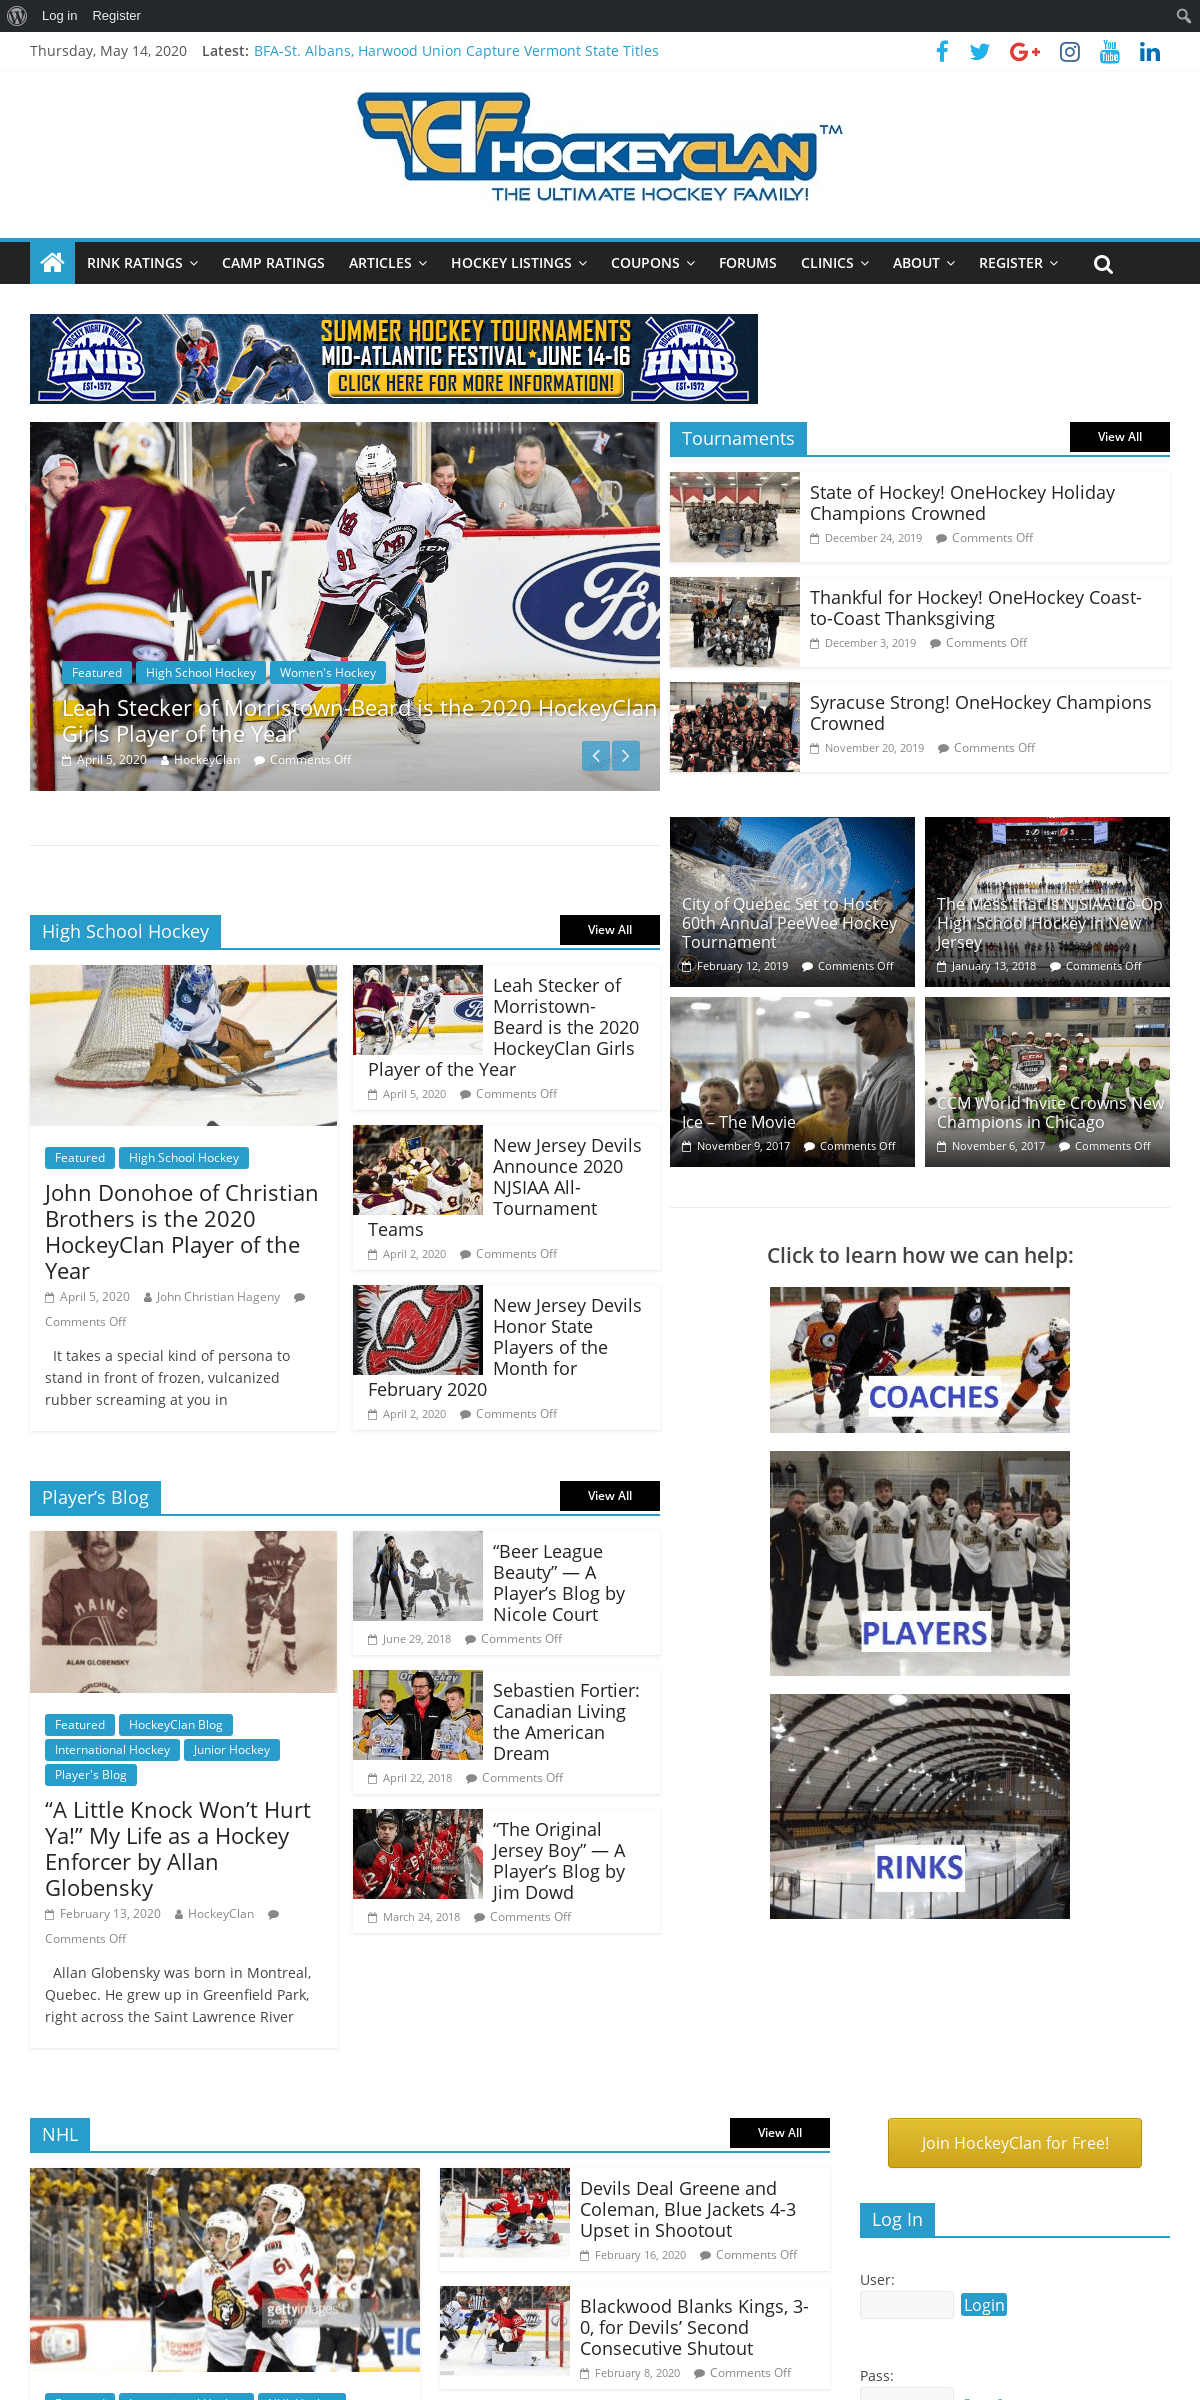 A complete backup of hockeyclan.com